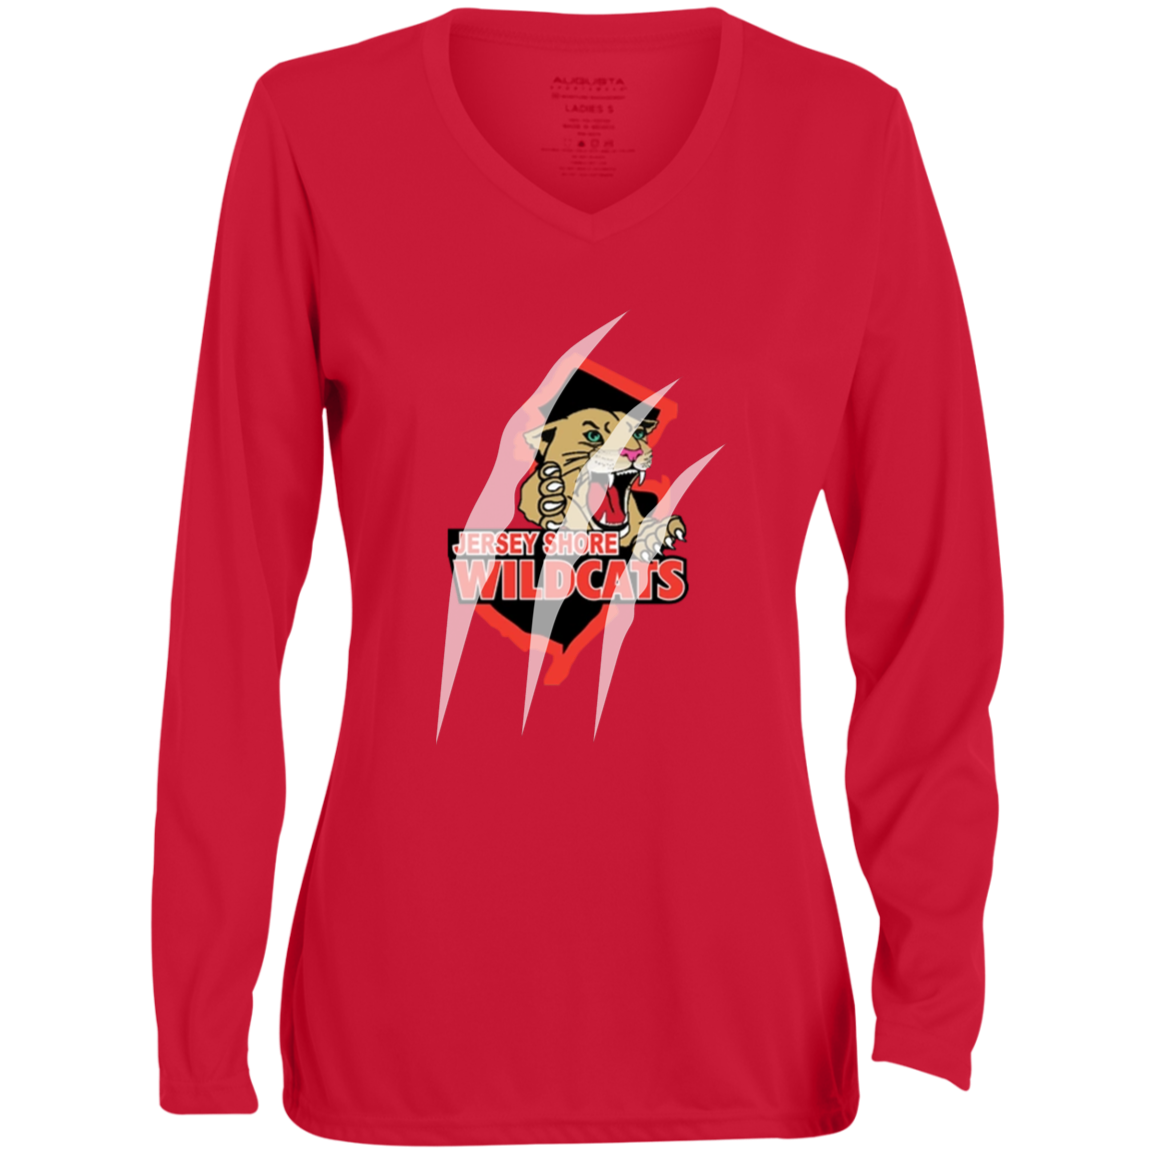 Claw Marks Wildcats Ladies' Moisture-Wicking Long Sleeve V-Neck Tee